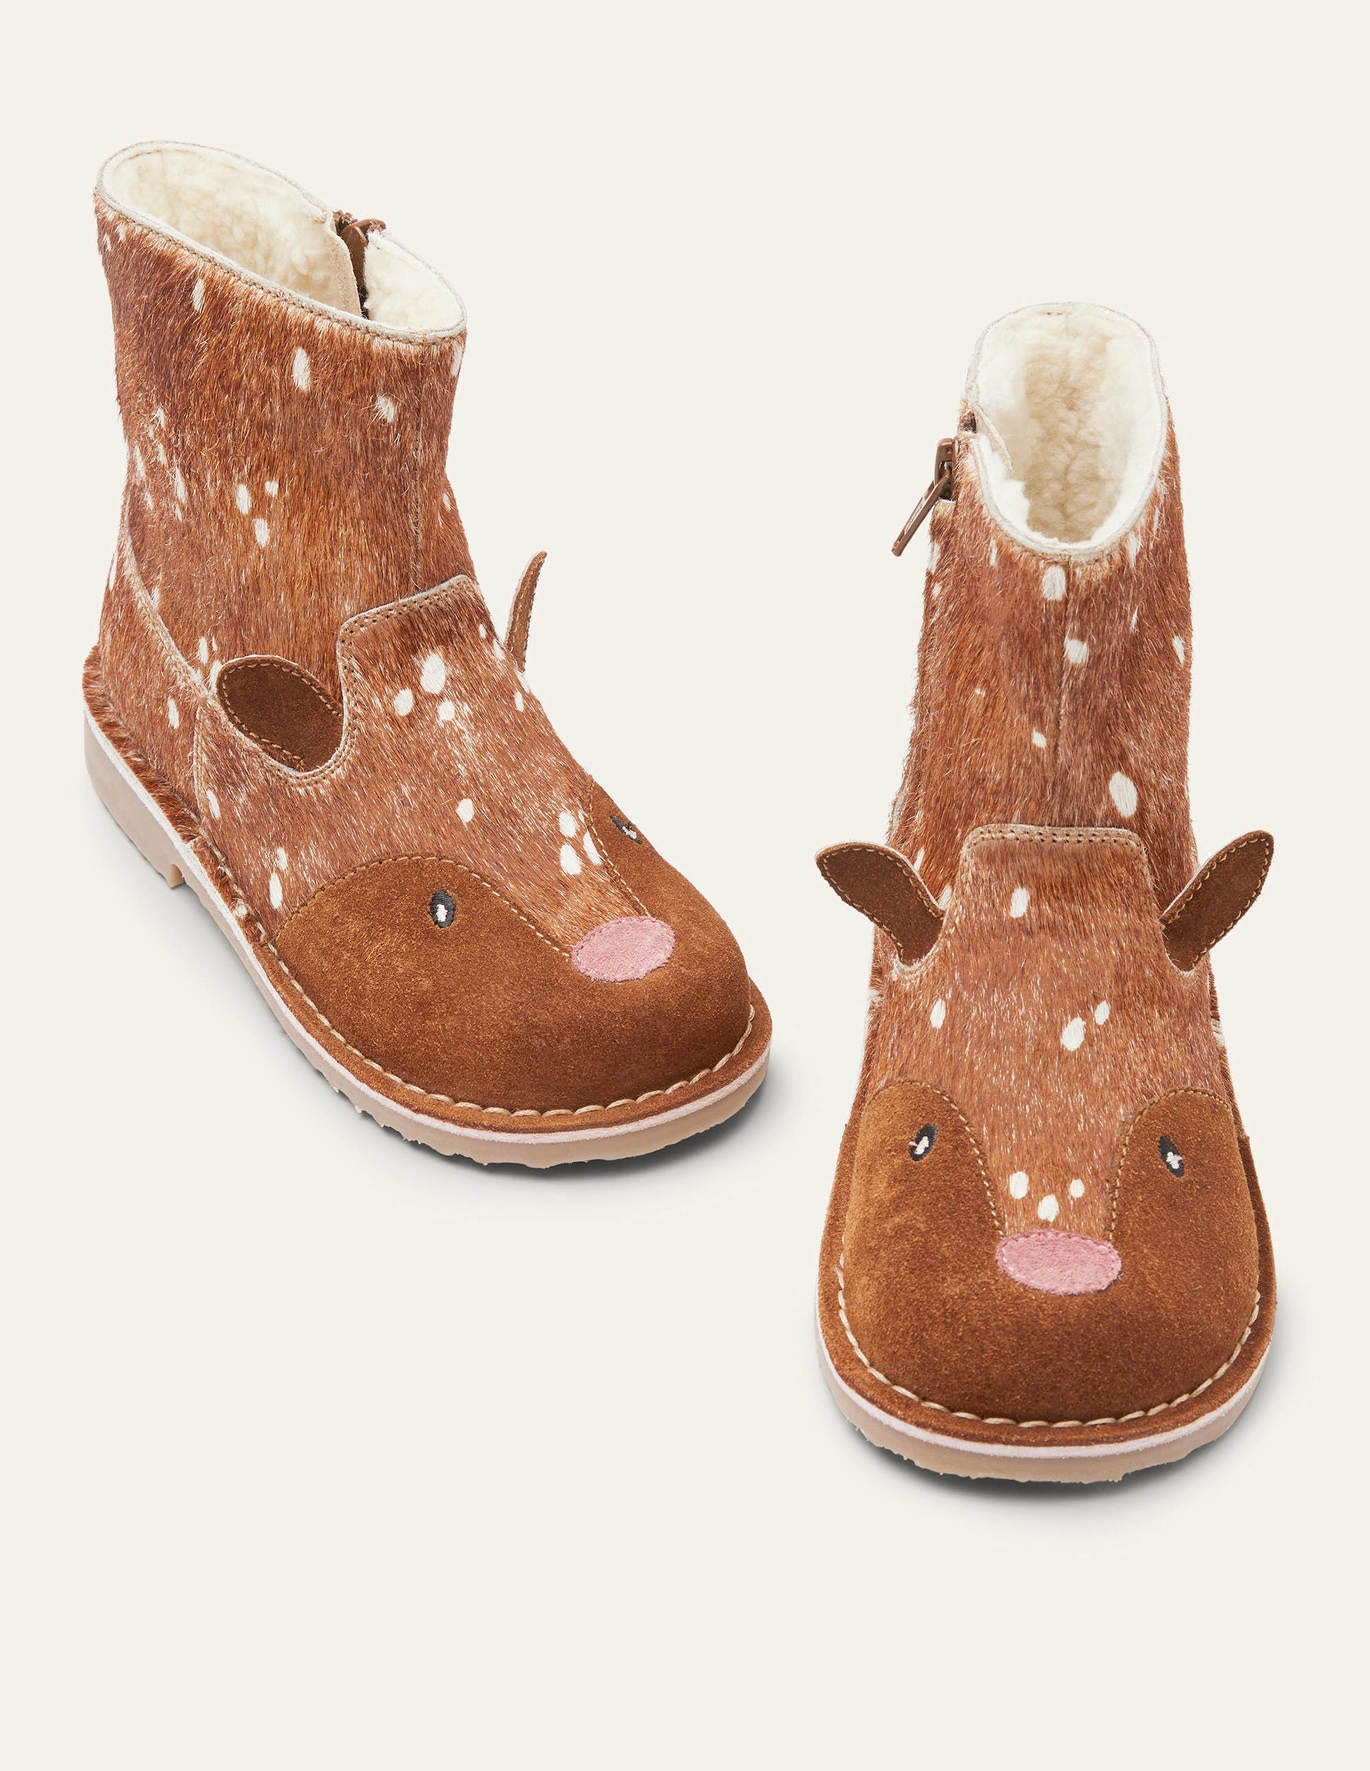 Boden Cosy Short Leather Boots - Deer Hair on Hide